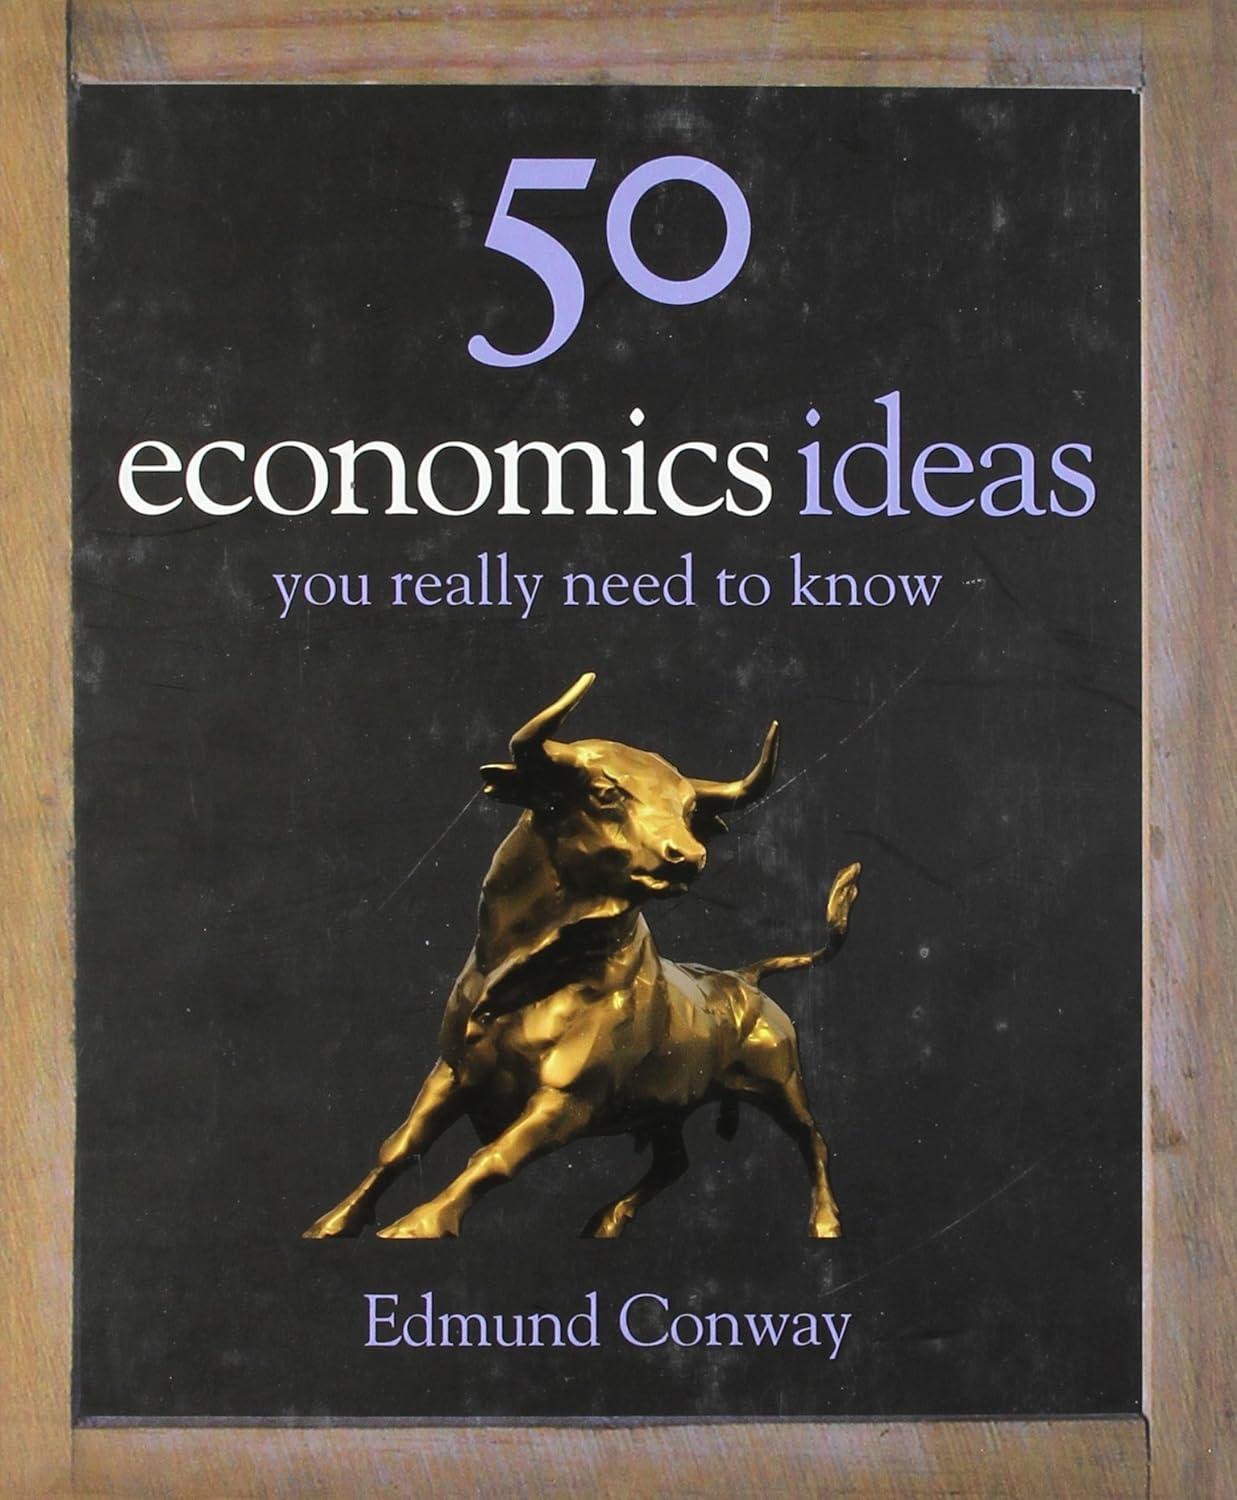 50 economics ideas you really need to know 1st edition edmund conway 1848660103, 978-1848660106